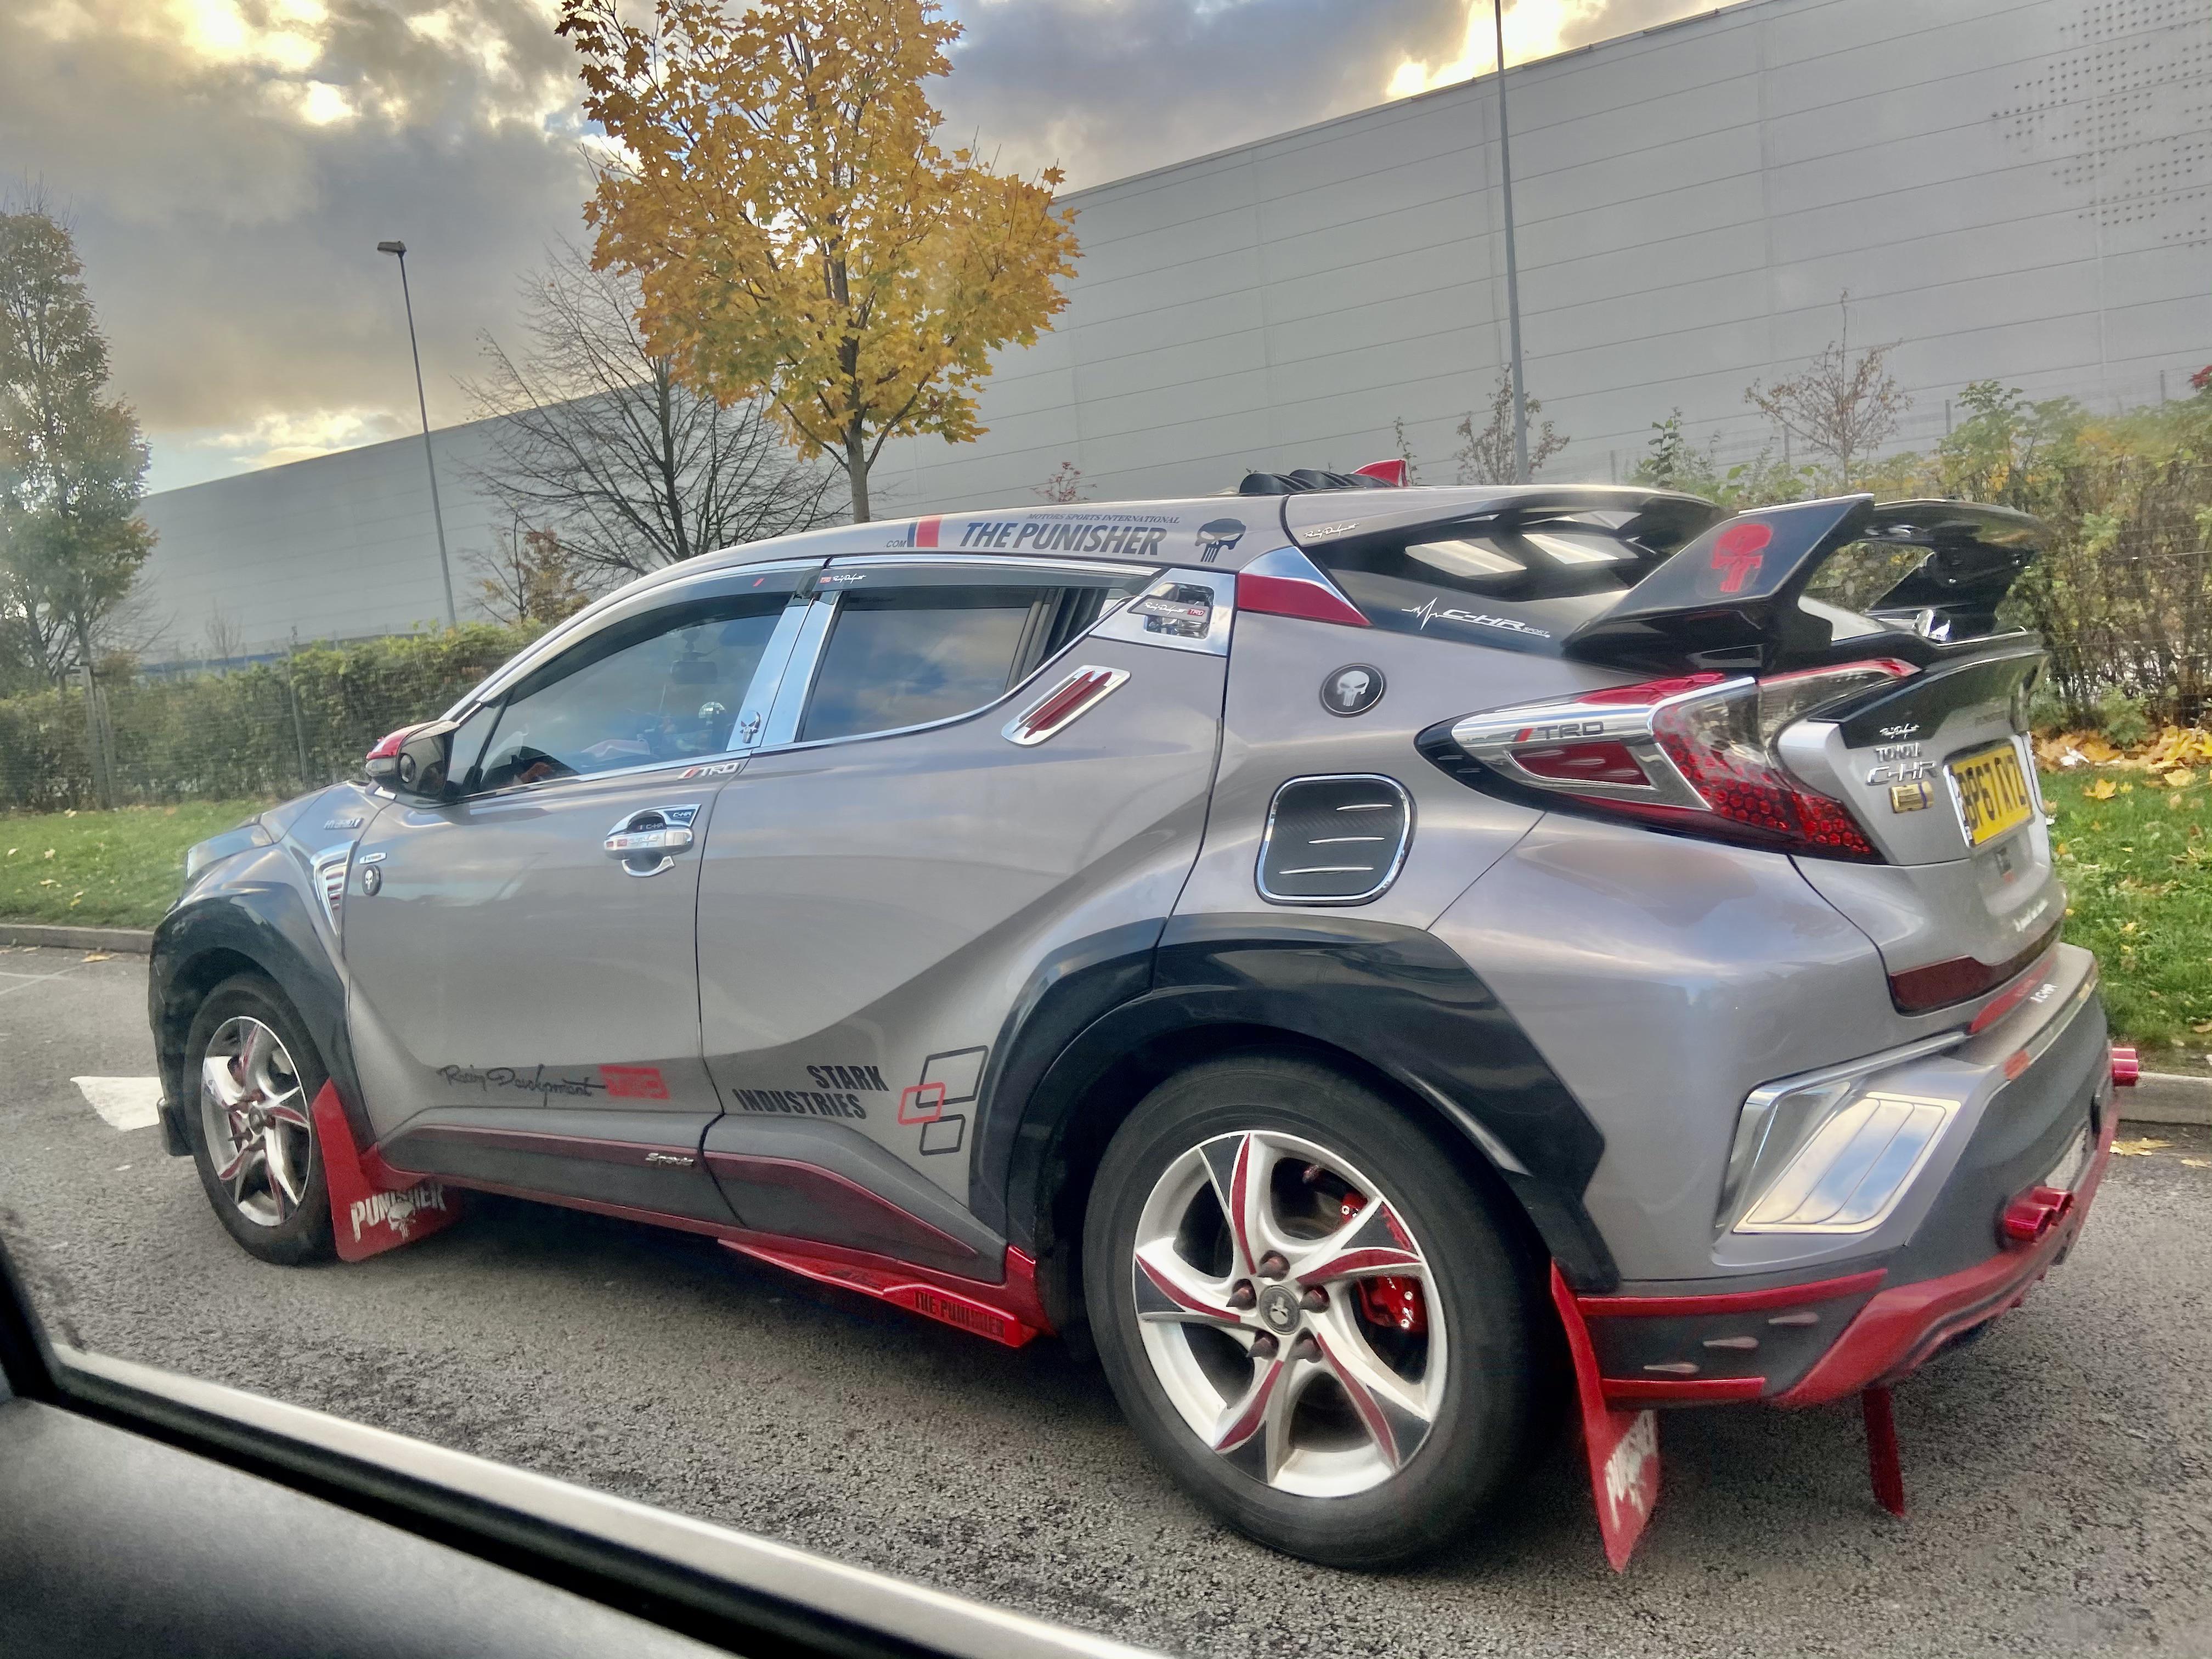 Toyota C-HR Carves Out Its Own Niche for 2020 with New Exterior